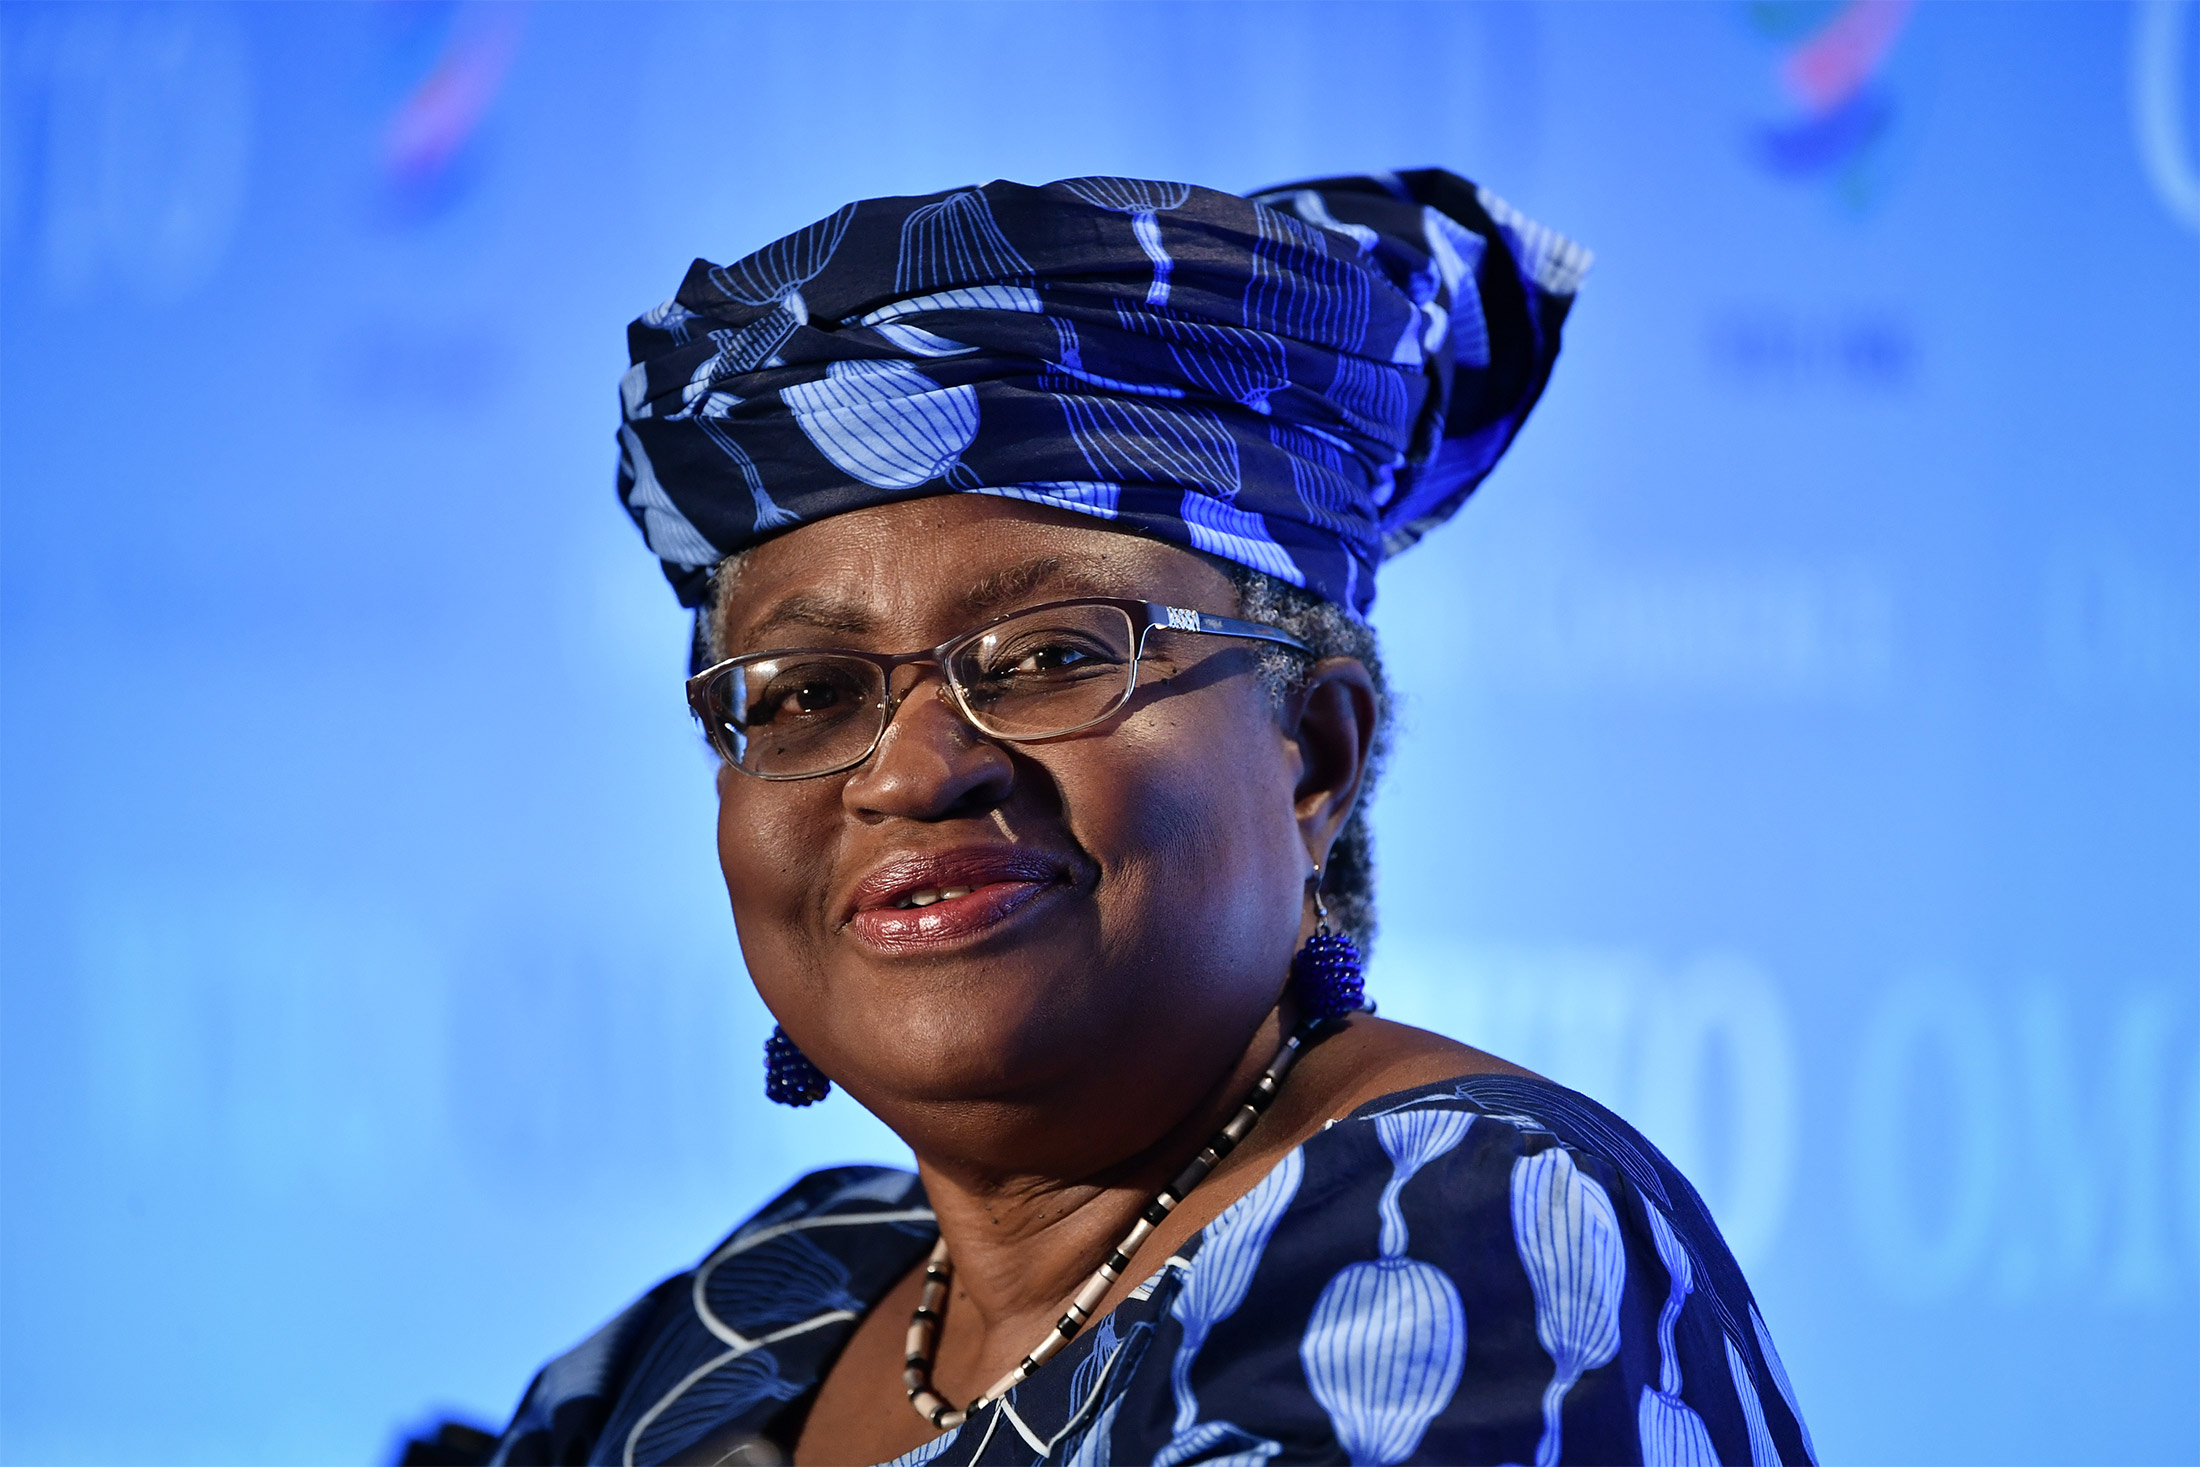 &nbsp;Ngozi Okonjo-Iweala&nbsp;twice served as Nigeria’s finance minister and is chair of the Global Alliance for Vaccines and Immunization.